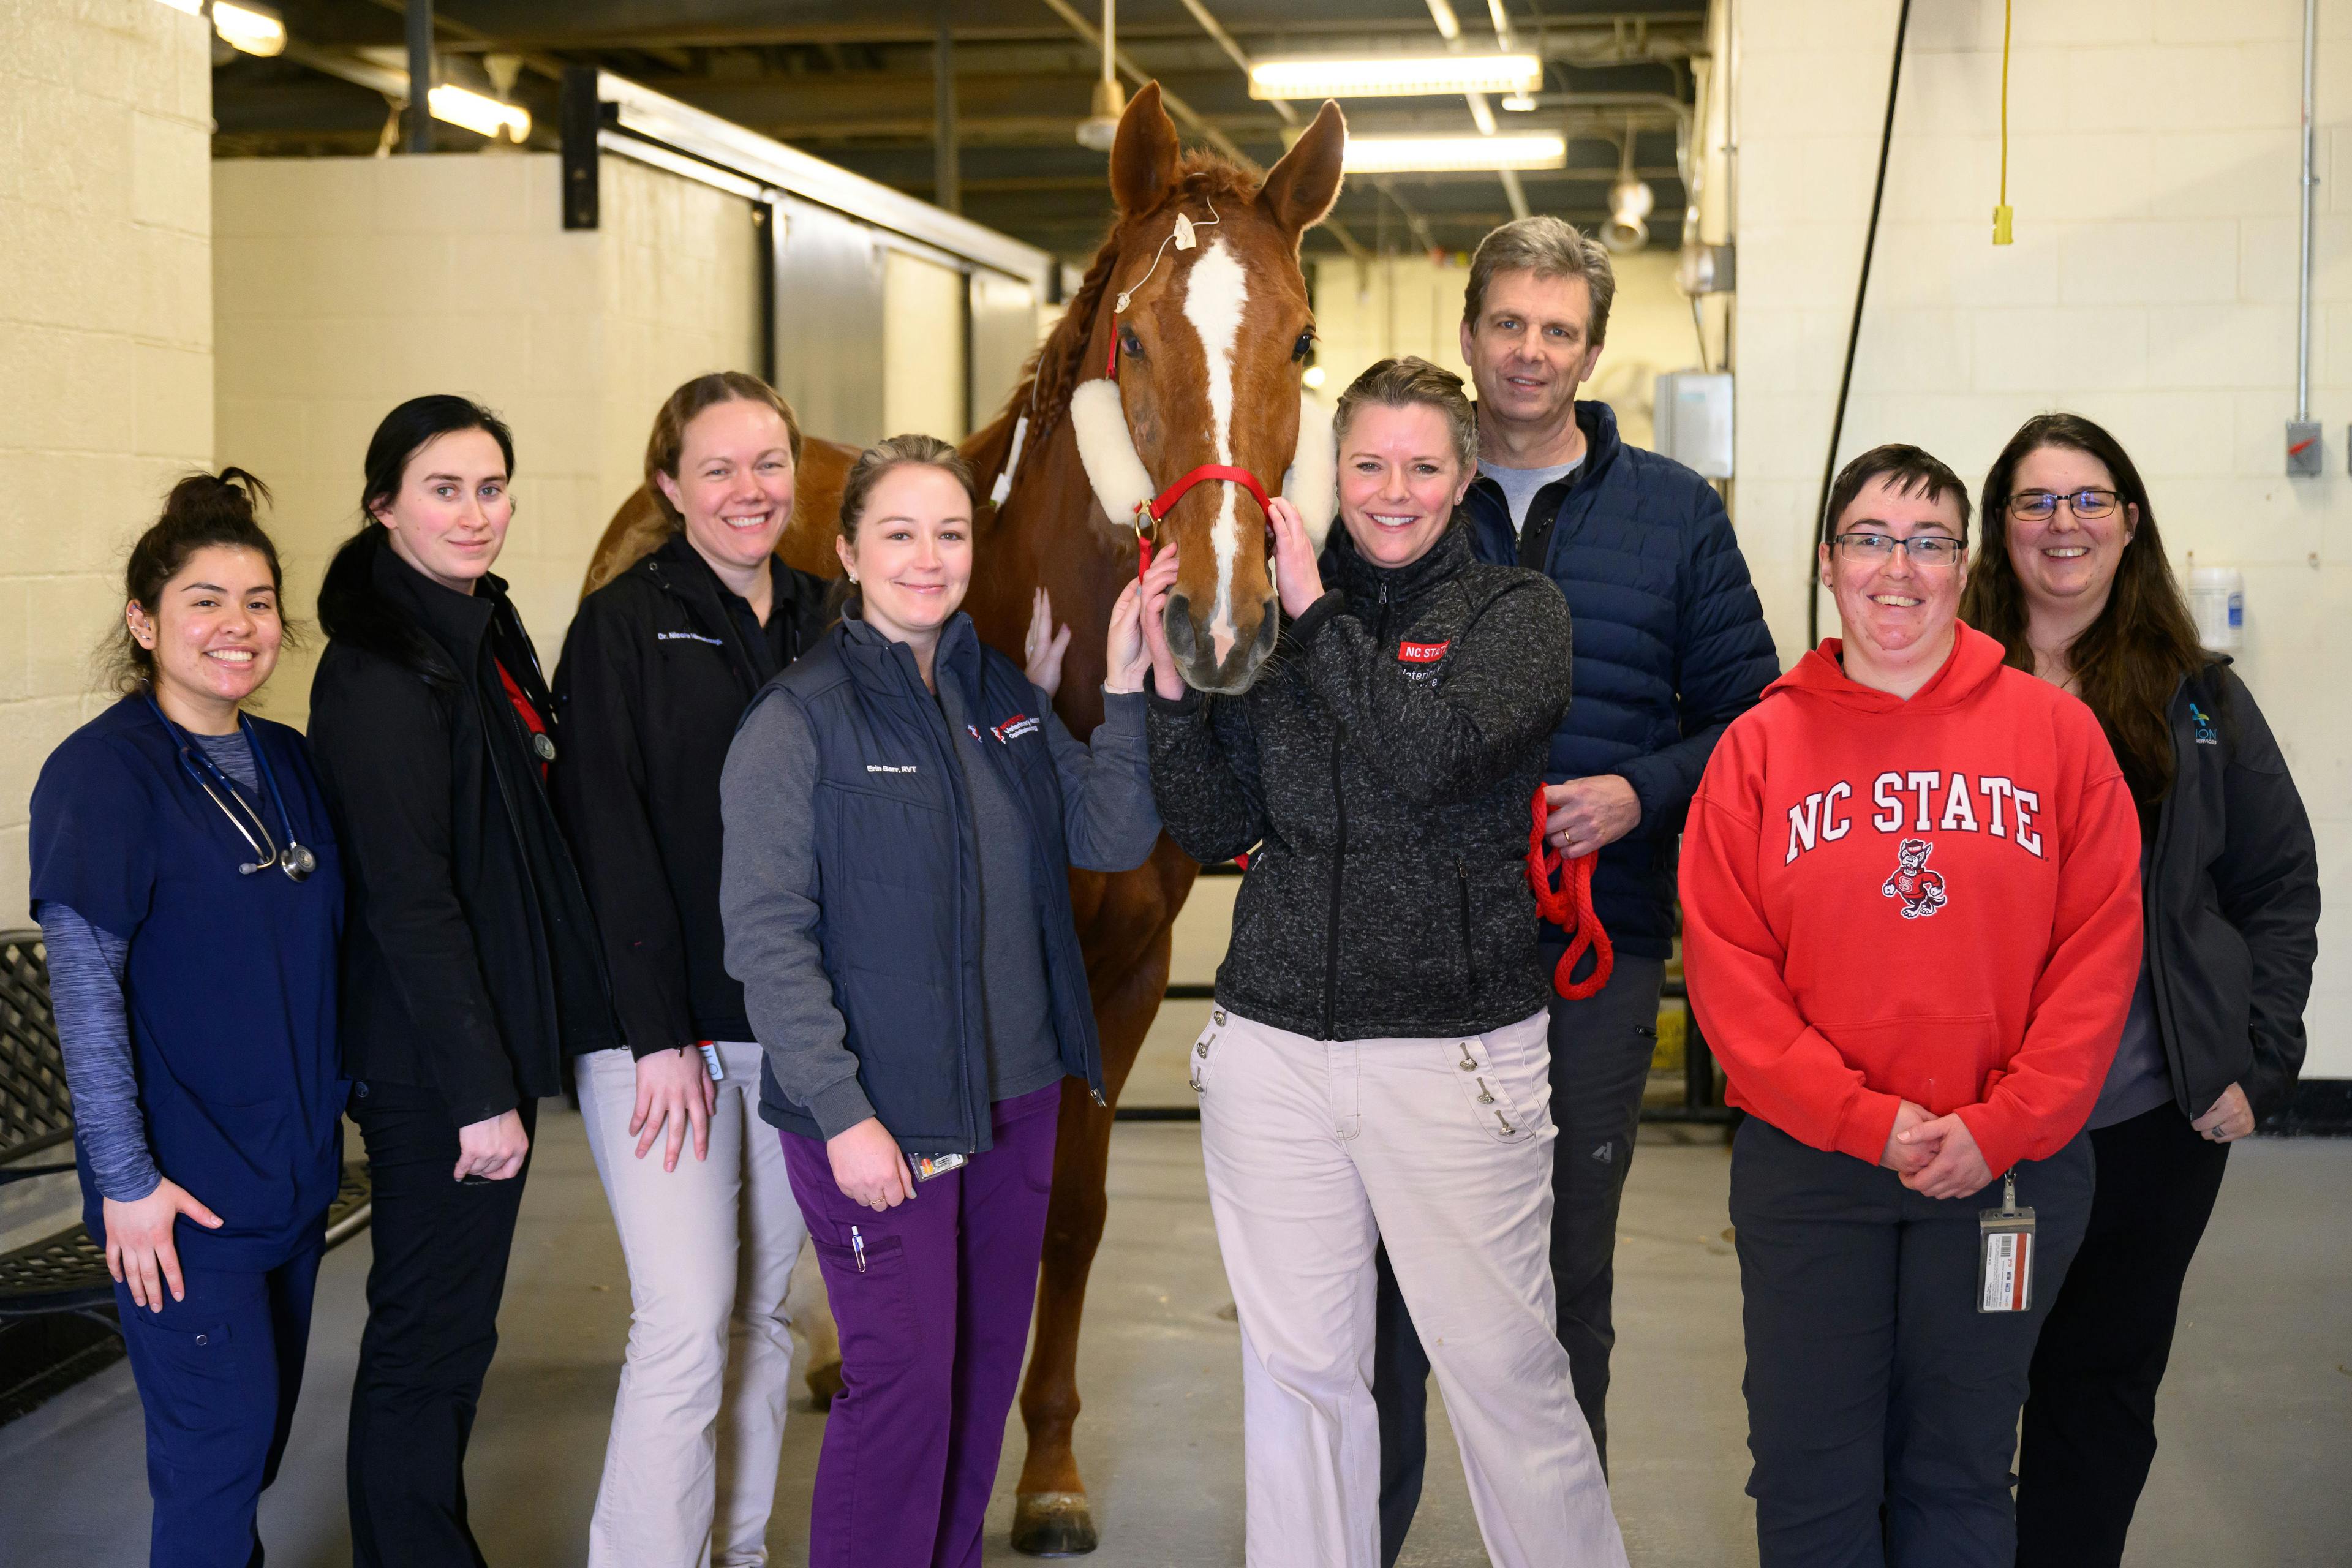 NC State College of Veterinary Medicine ophthalmology and Large Animal Hospital teams with patient, Myra. To Myra's immediate left is Erin Barr, RVT. To Myra's immediate right is Michala Henriksen, DVM, PhD, and Brian C. Gilger, DVM, MS, DACVO, respectively. (Photo credit: John Joyner / NC State College of Veterinary Medicine)